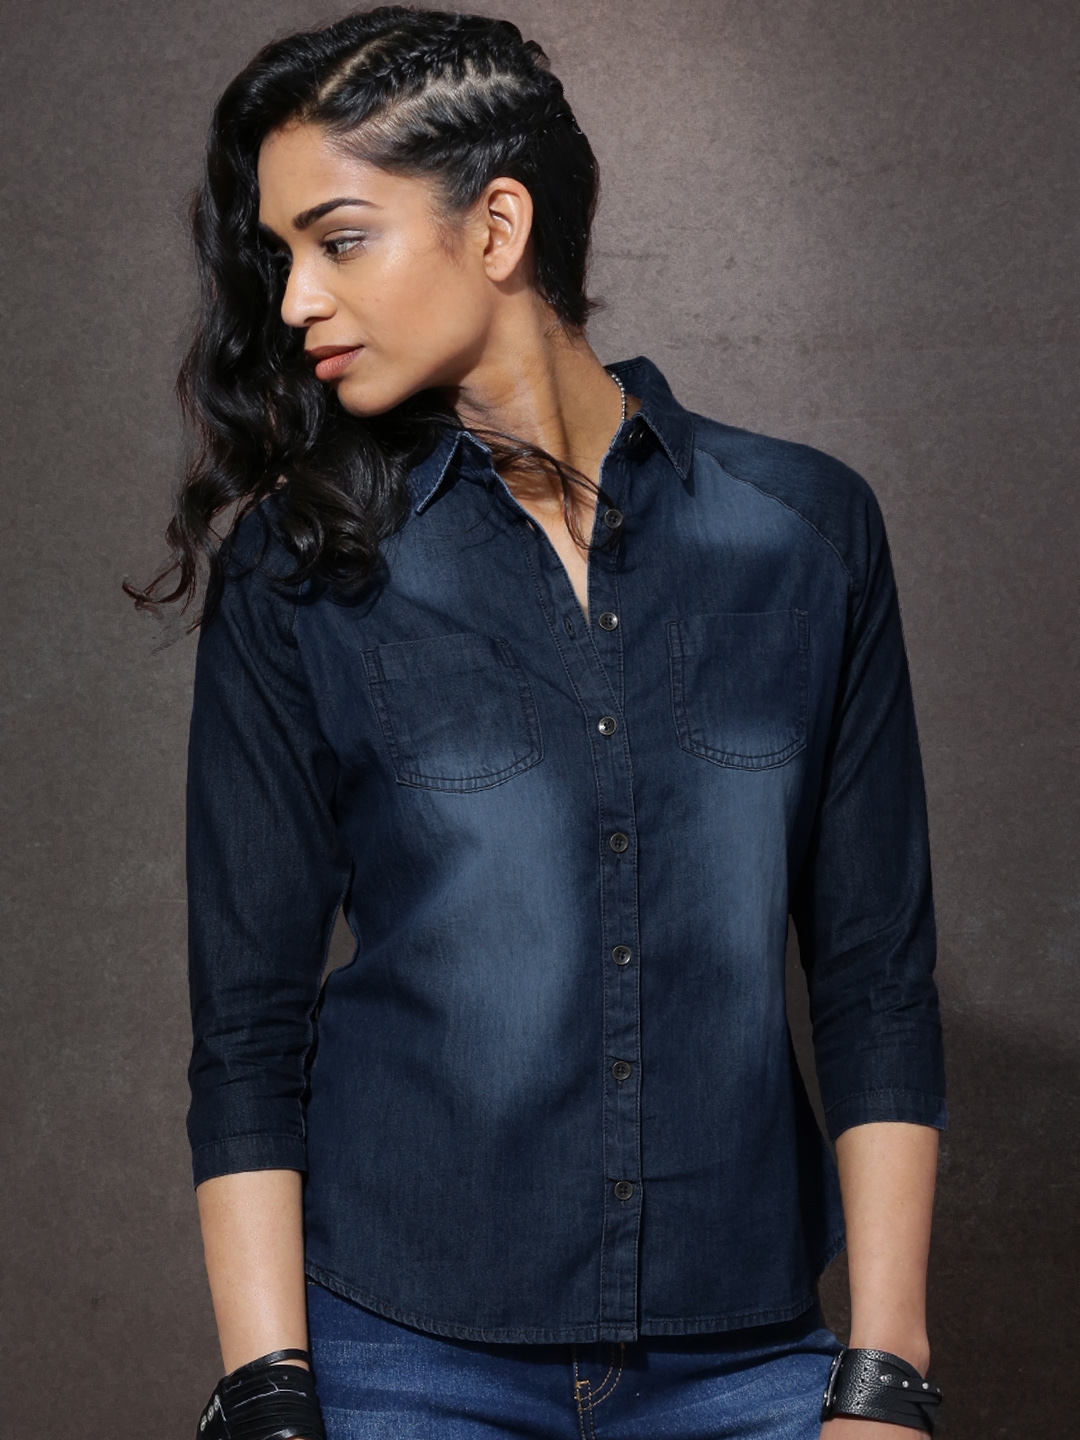 Roadster Jeans Shirts - Buy Roadster Jeans Shirts online in India-totobed.com.vn